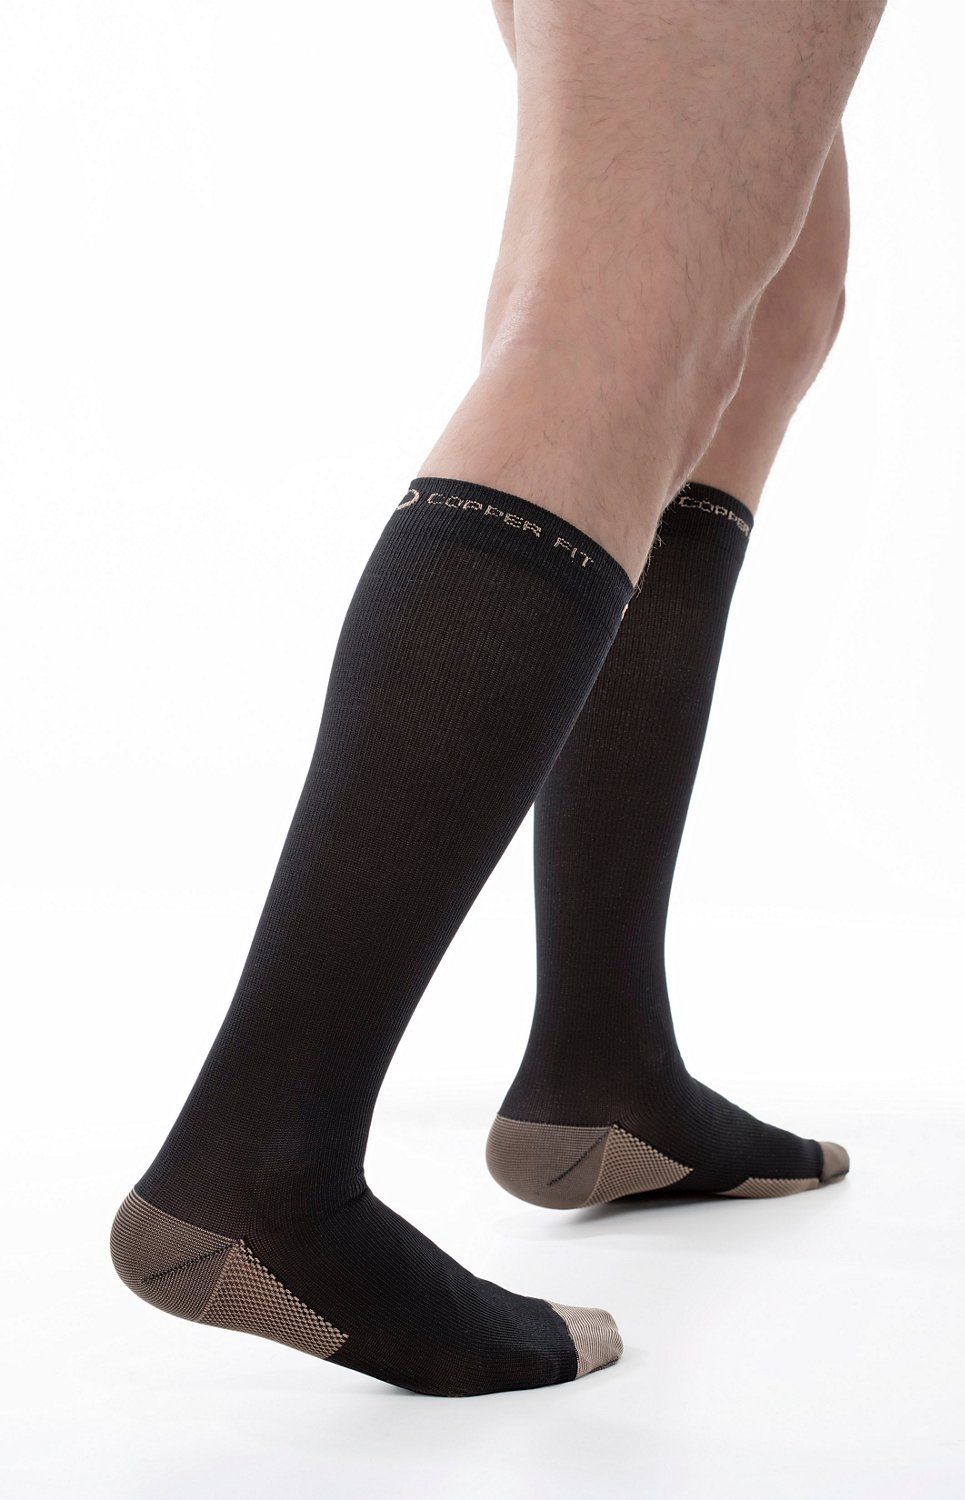 Copper Fit Knee-High Compression Socks | Academy